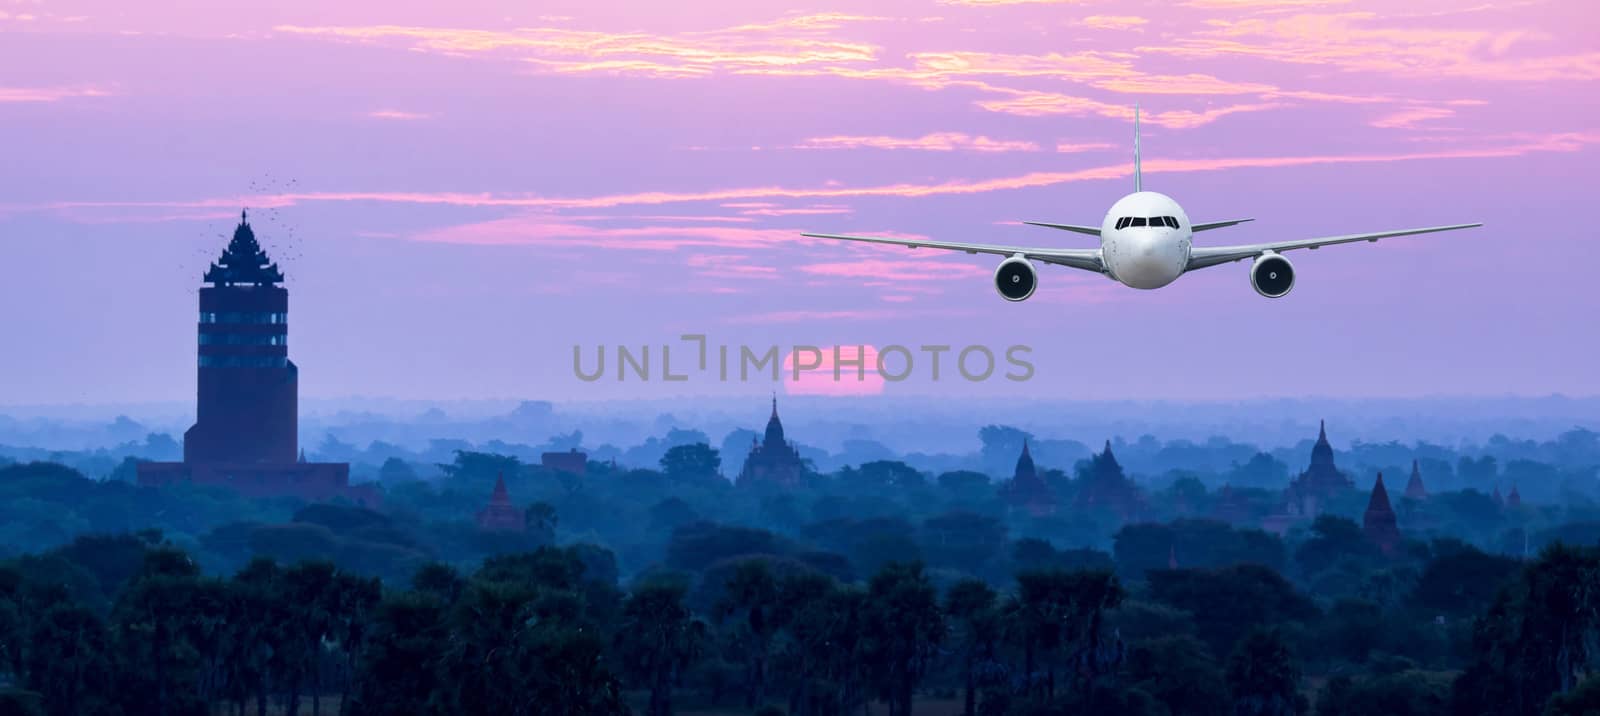 Front of real plane aircraft, on Pagoda Sunset in Bagan,Myanmar background